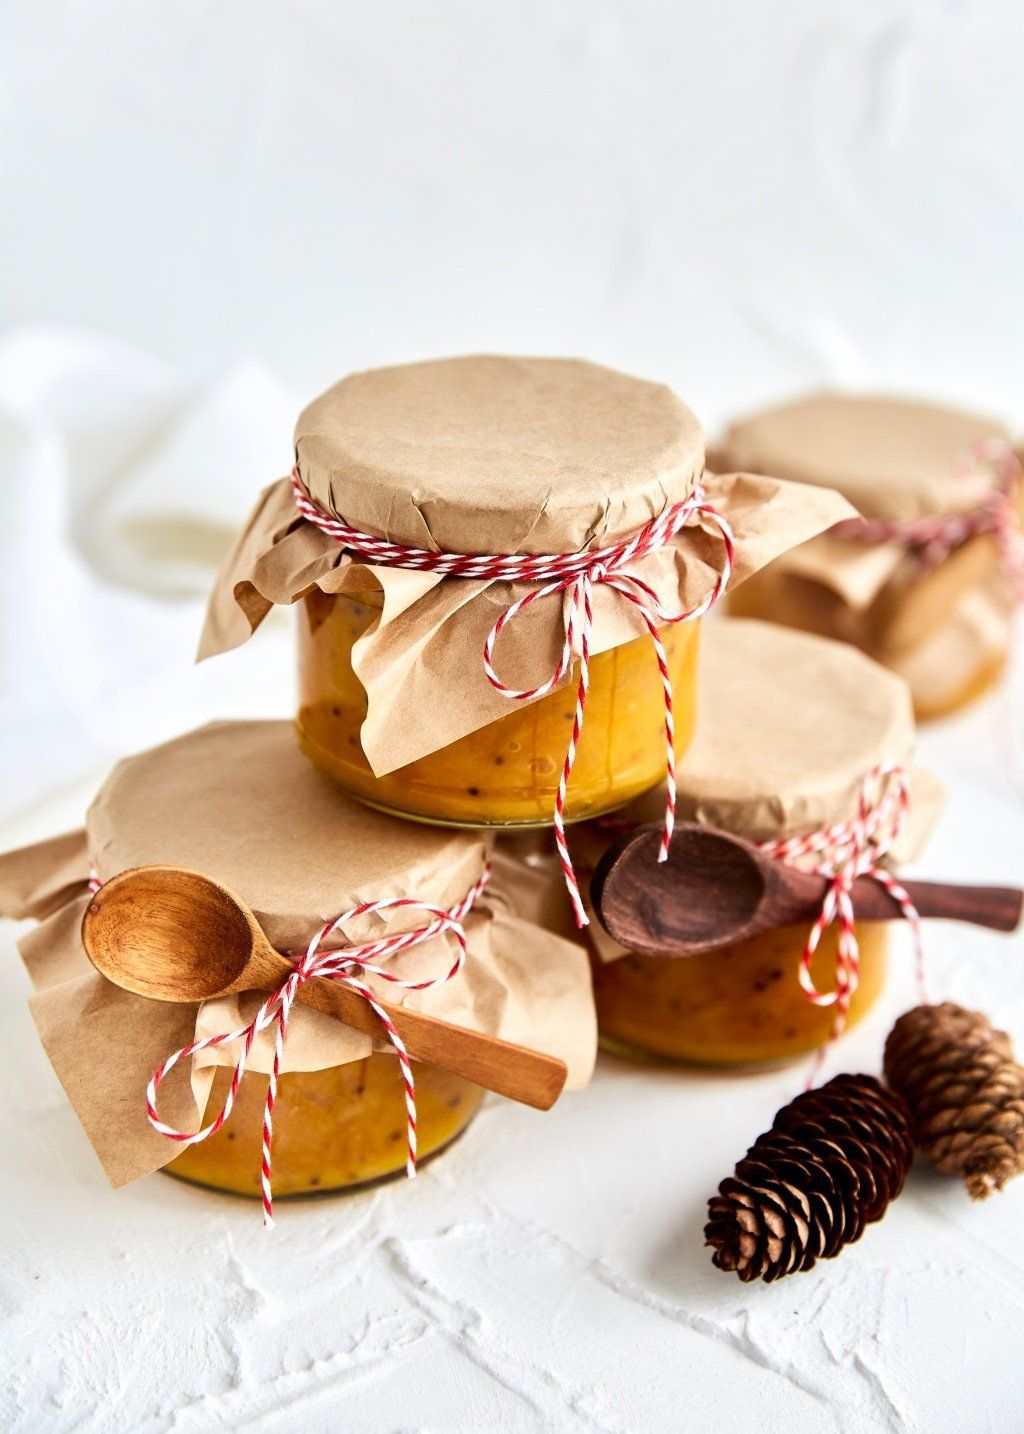 DIY Christmas Gifts - DIY Christmas Gifts -   19 diy Food gifts ideas